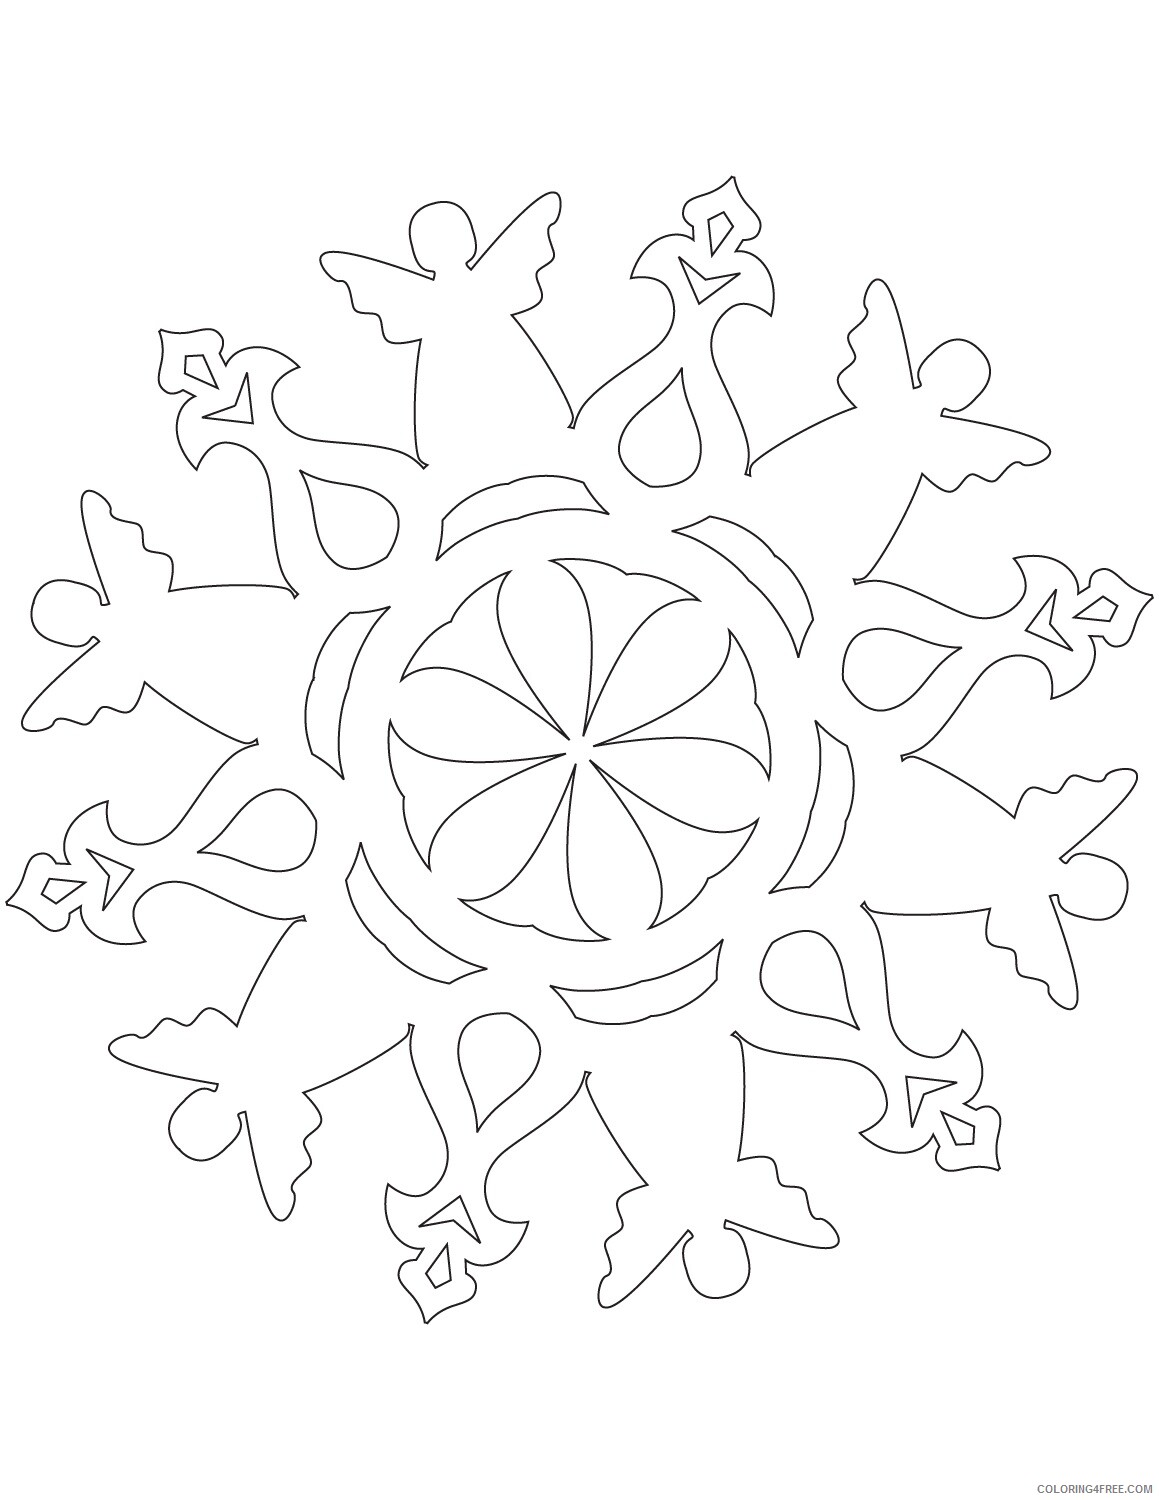 Angels Coloring Pages 1584065428_snowflake with an angel_1 Printable 2021 0161 Coloring4free